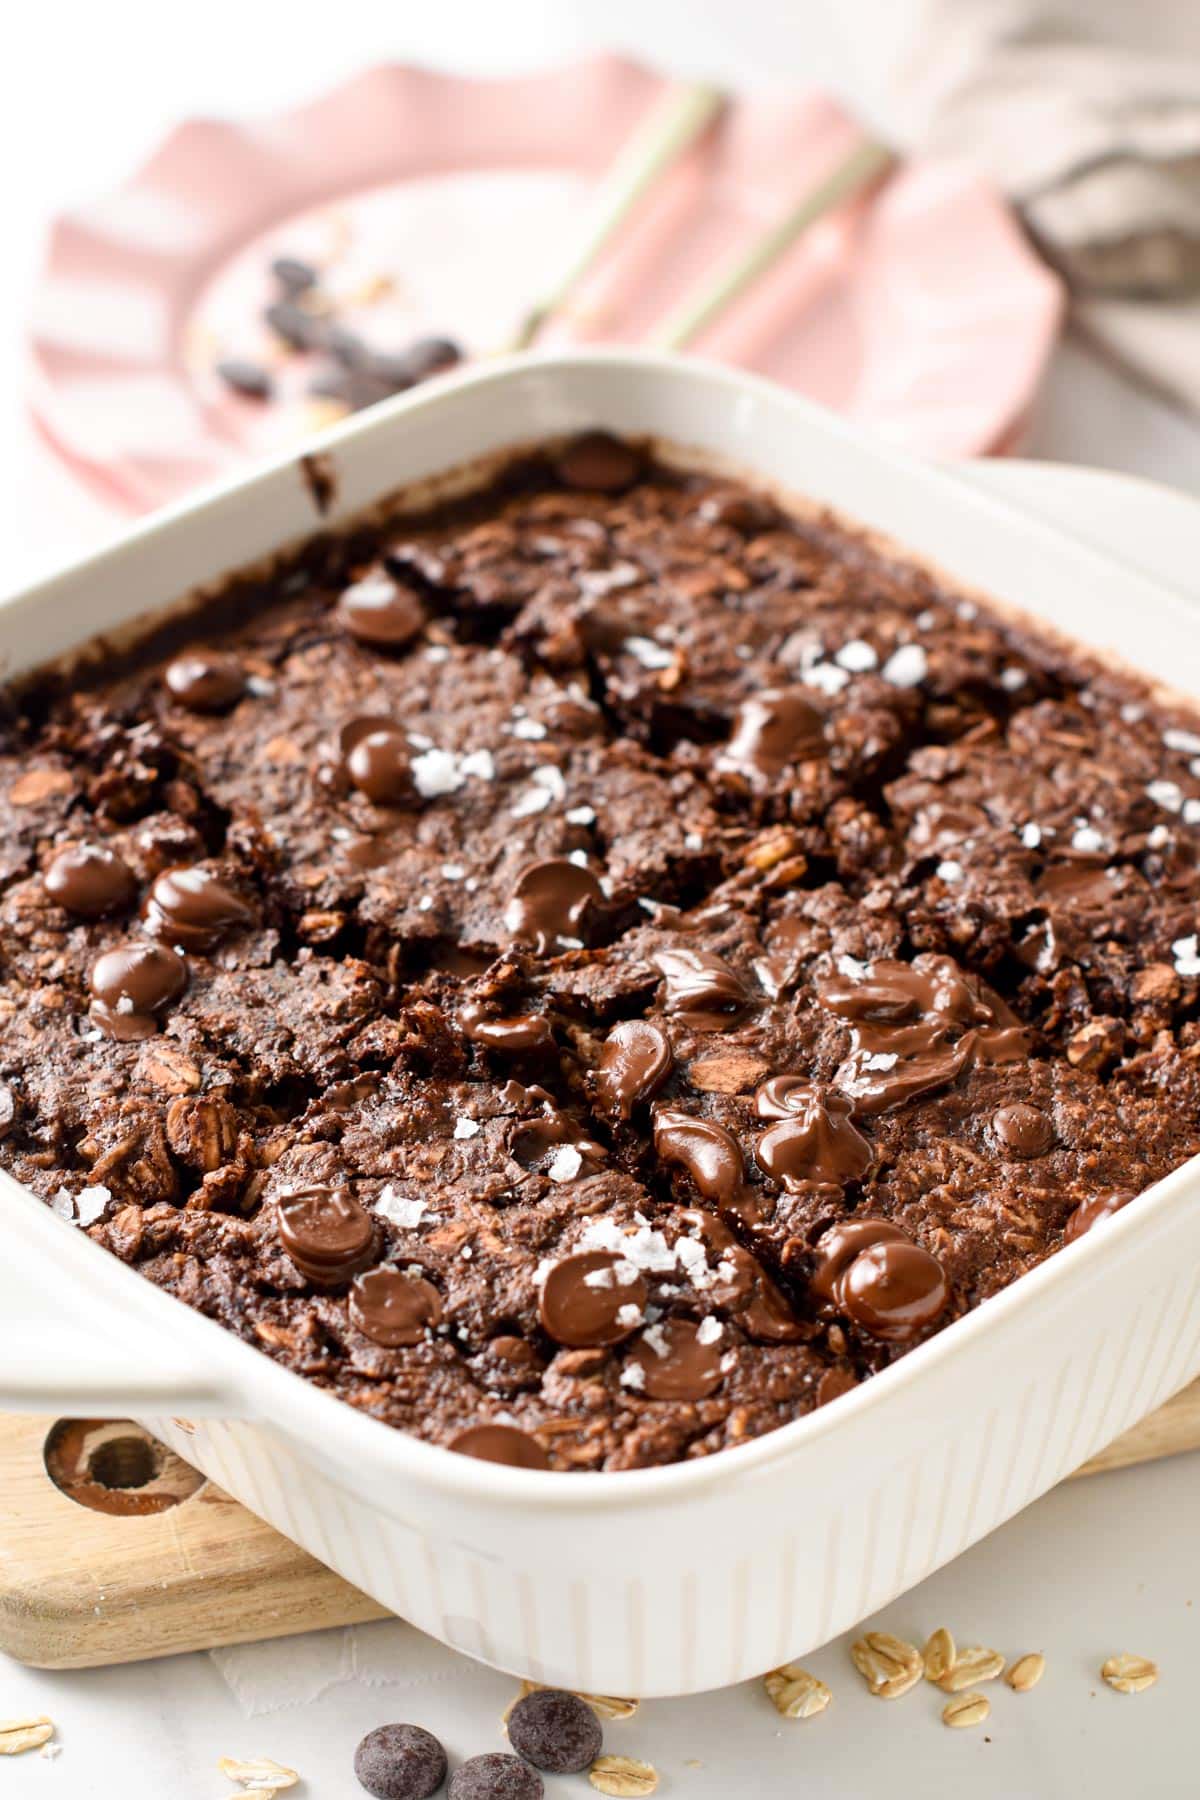 This Baked Brownie Oatmeal is a creamy chocolate baked oatmeal recipe filled with 9 grams of protein per serving for a healthy breakfast.